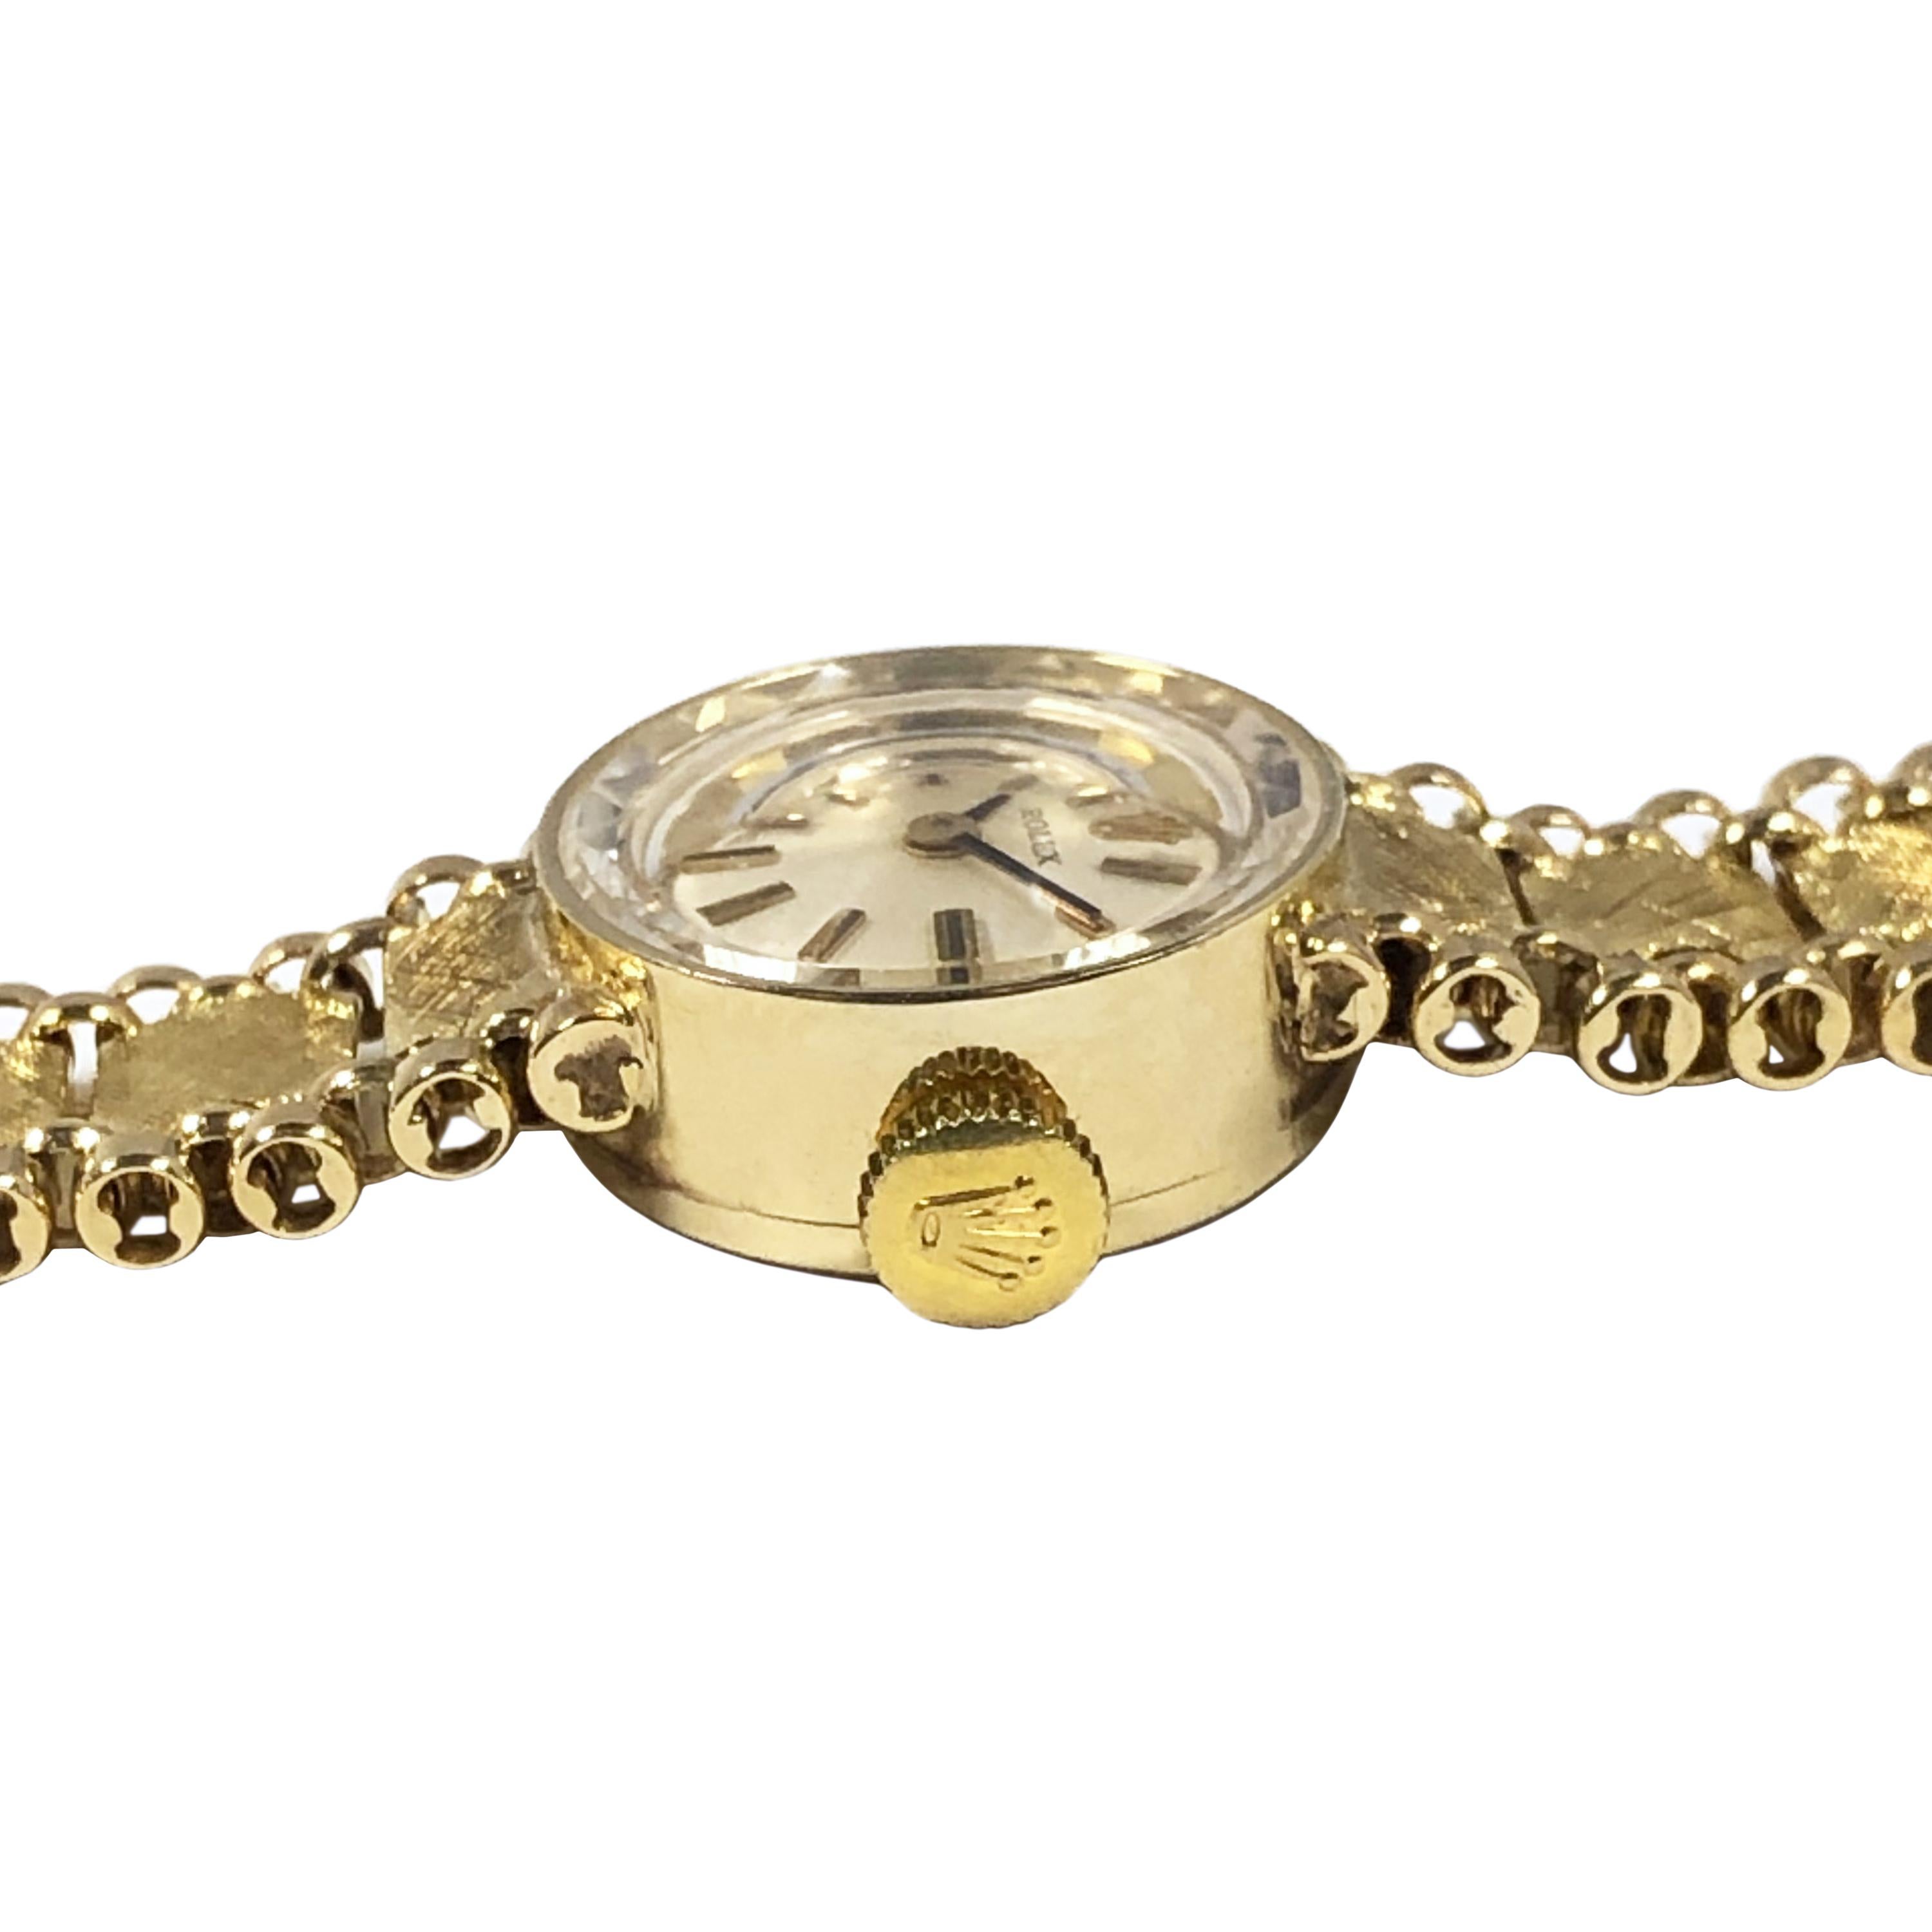 Circa 1980 Rolex Ladies Bracelet Wrist Watch, 25 M.M. 14k Yellow Gold 2 piece case, 17 Jewel mechanical, manual wind movement, Silver Satin Dial with raised Gold markers, Rolex logo Crown. 3/8 inch wide tapering 14k Yellow Gold link Bracelet with